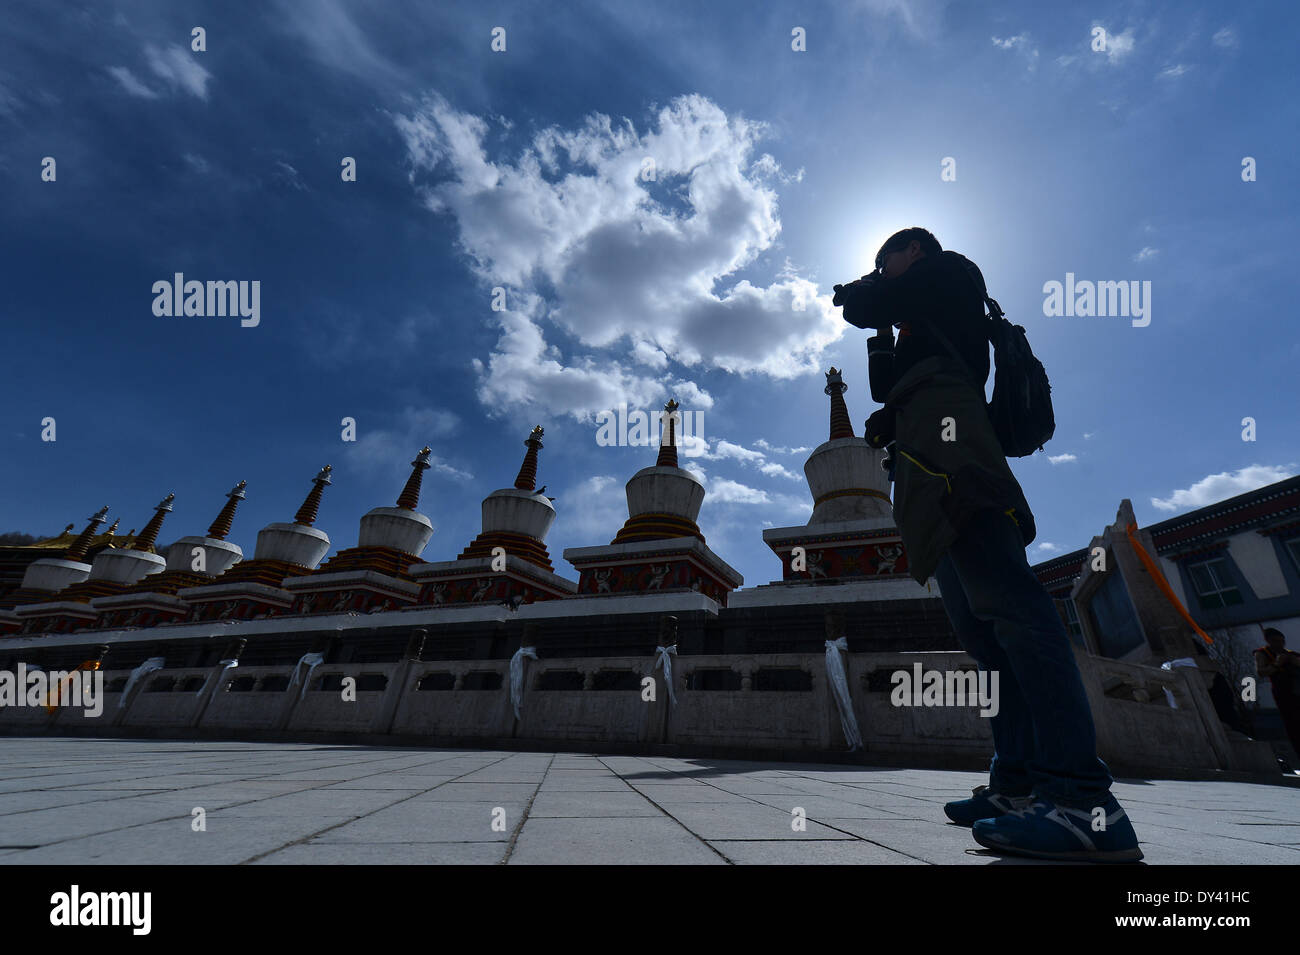 Huangzhong County, China's Qinghai Province. 6th Apr, 2014. A tourist taks photos in the Kumbum Monastery in Huangzhong County of Xining, capital of northwest China's Qinghai Province, April 6, 2014. The Kumbum Monastery is a main destination for Tibetan Buddhist pilgrims. It is also a major tourist attraction in Qinghai, which features splendid religious murals, Thangka appliques and butter sculptures. © Wu Gang/Xinhua/Alamy Live News Stock Photo